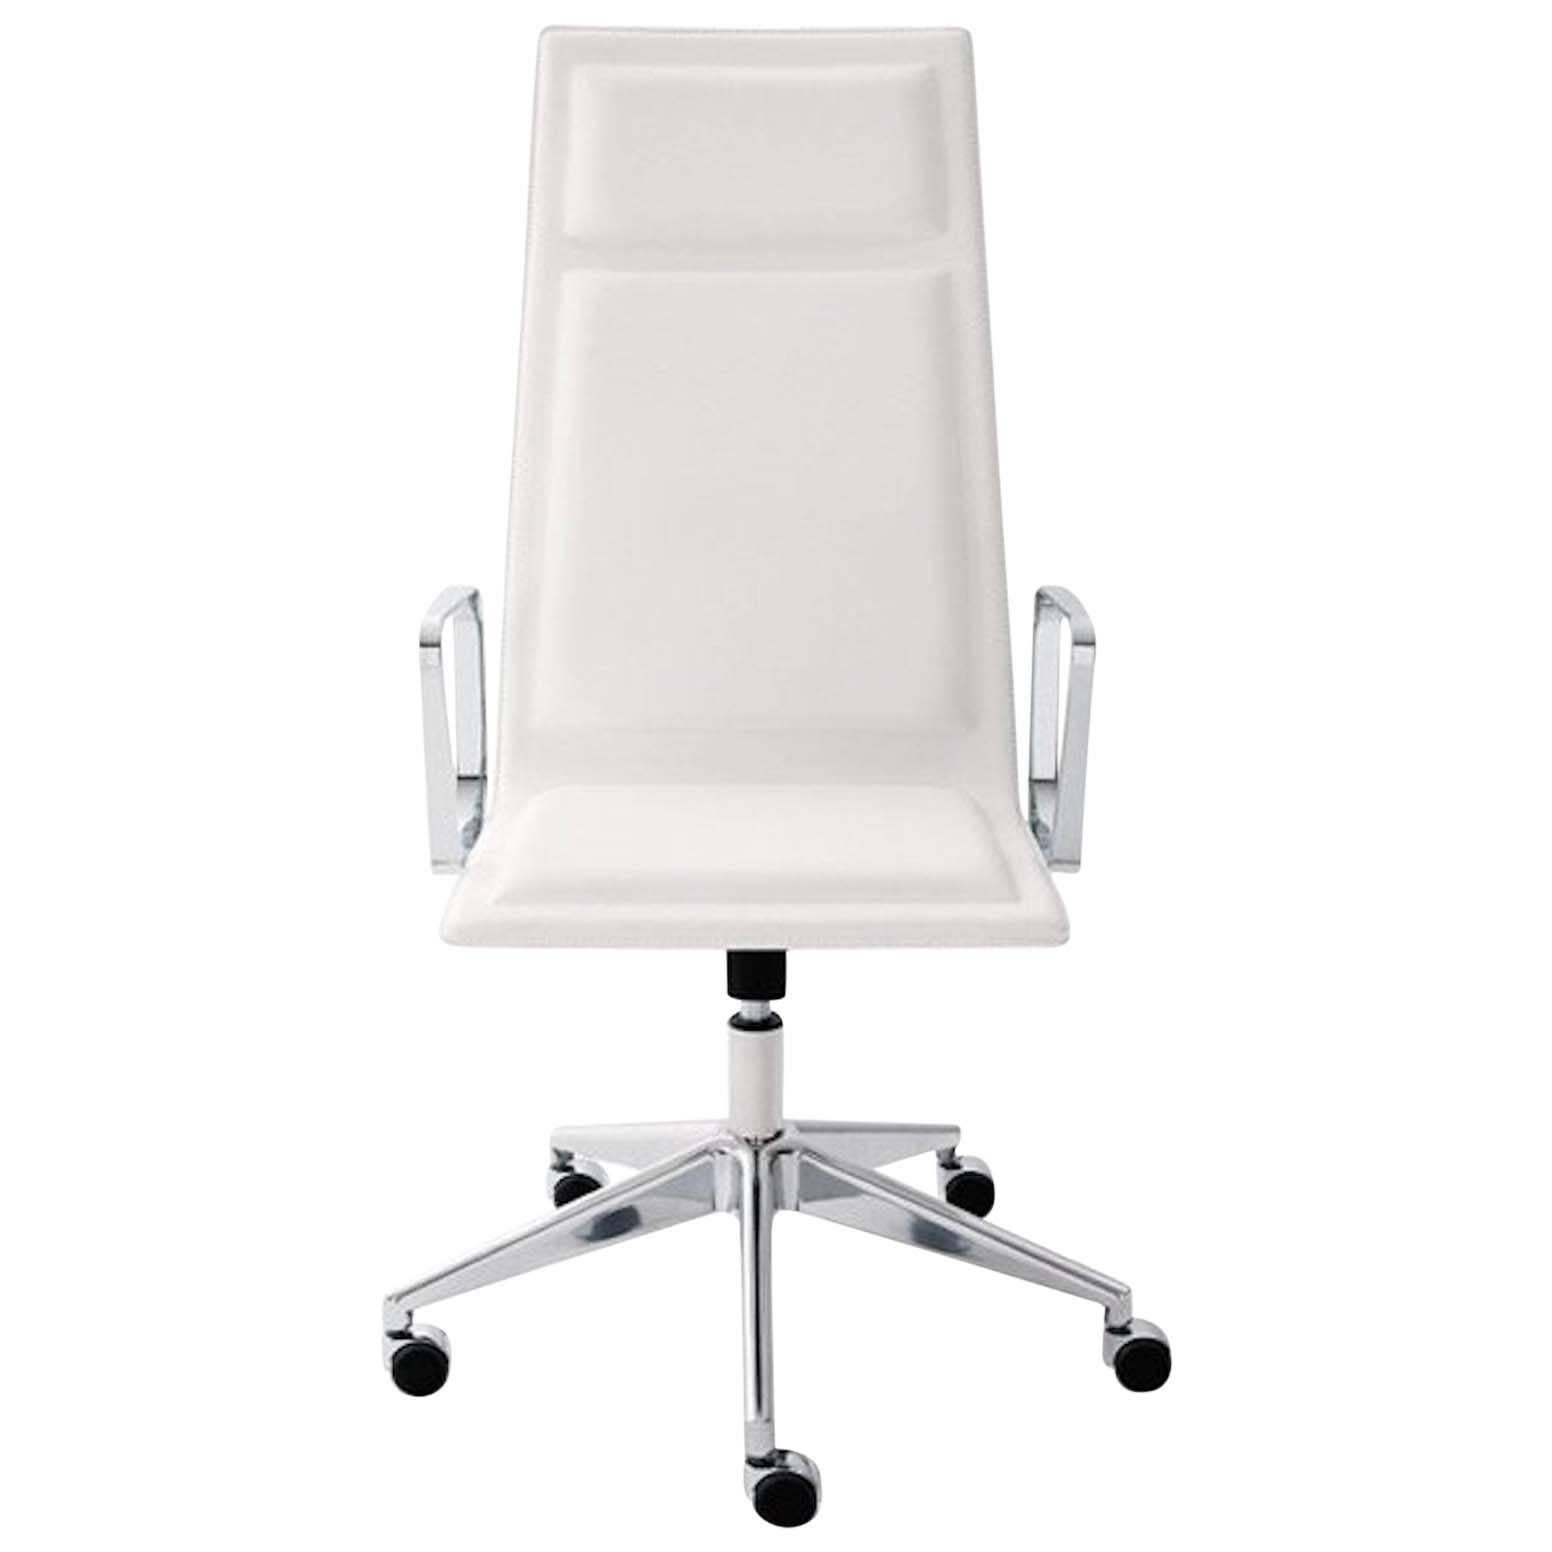 OFX 09 Ergonomic Office/Task Chair with or W/O Castors by Gallotti & Radice For Sale